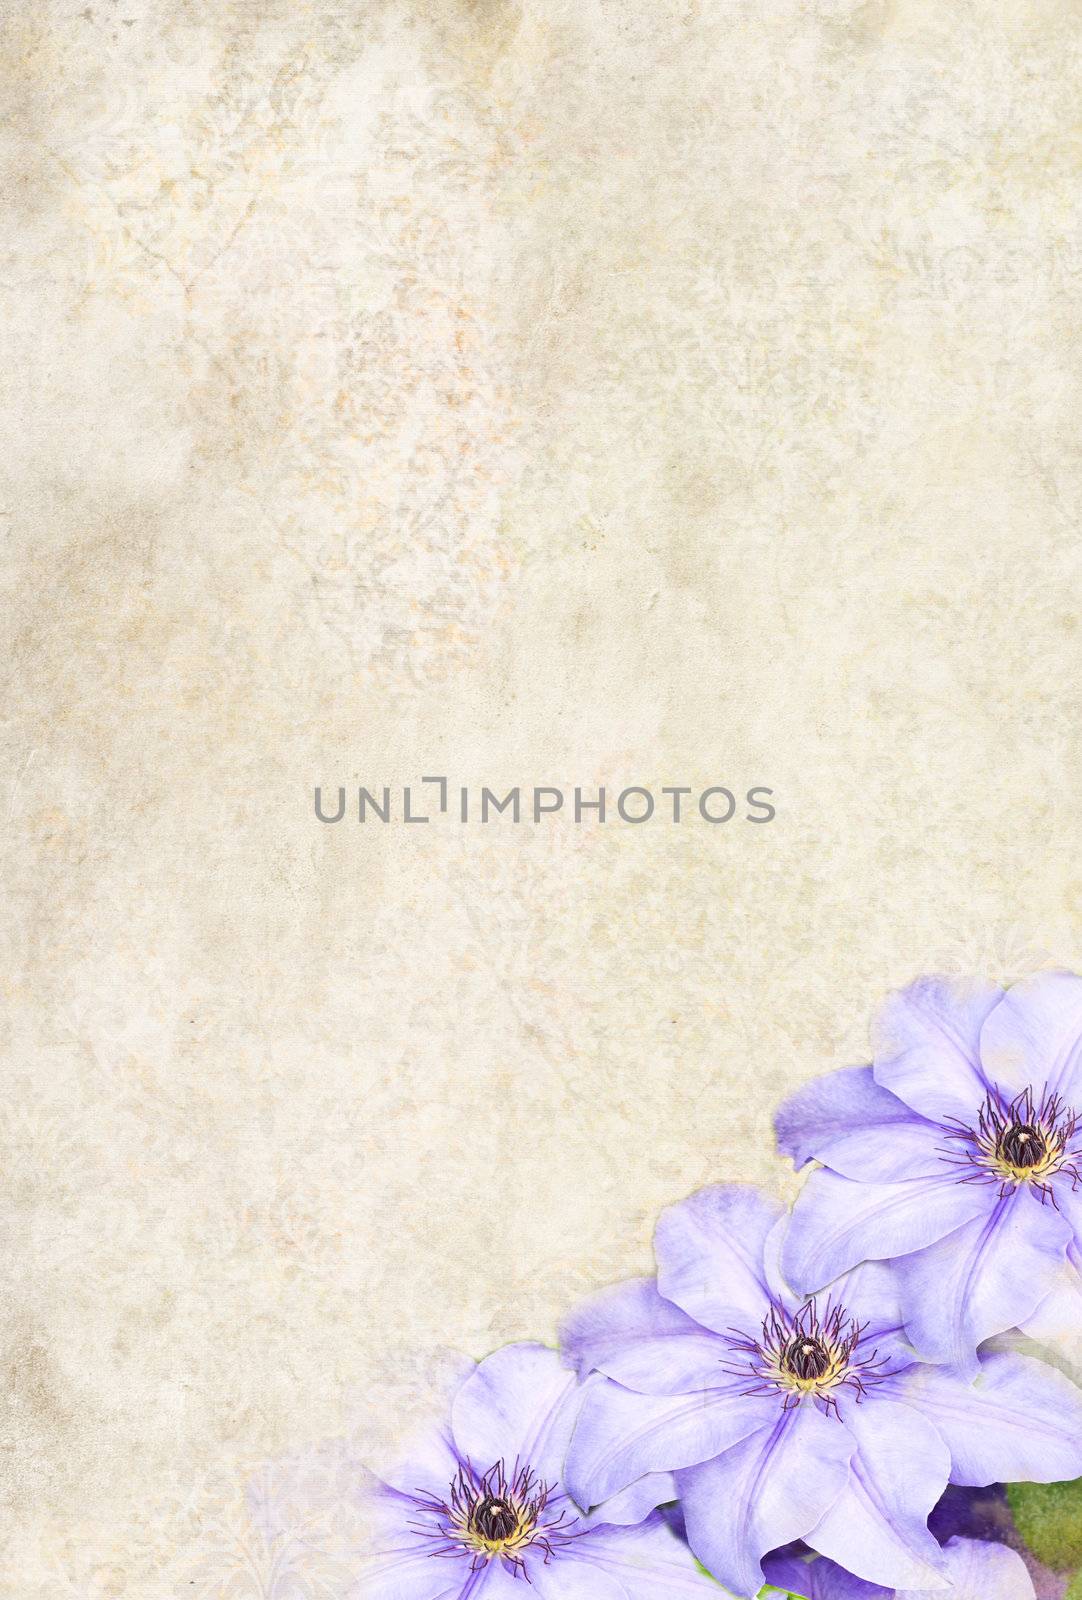 Photo based illustrated background with purple Clematis flowers in the lower corner. 